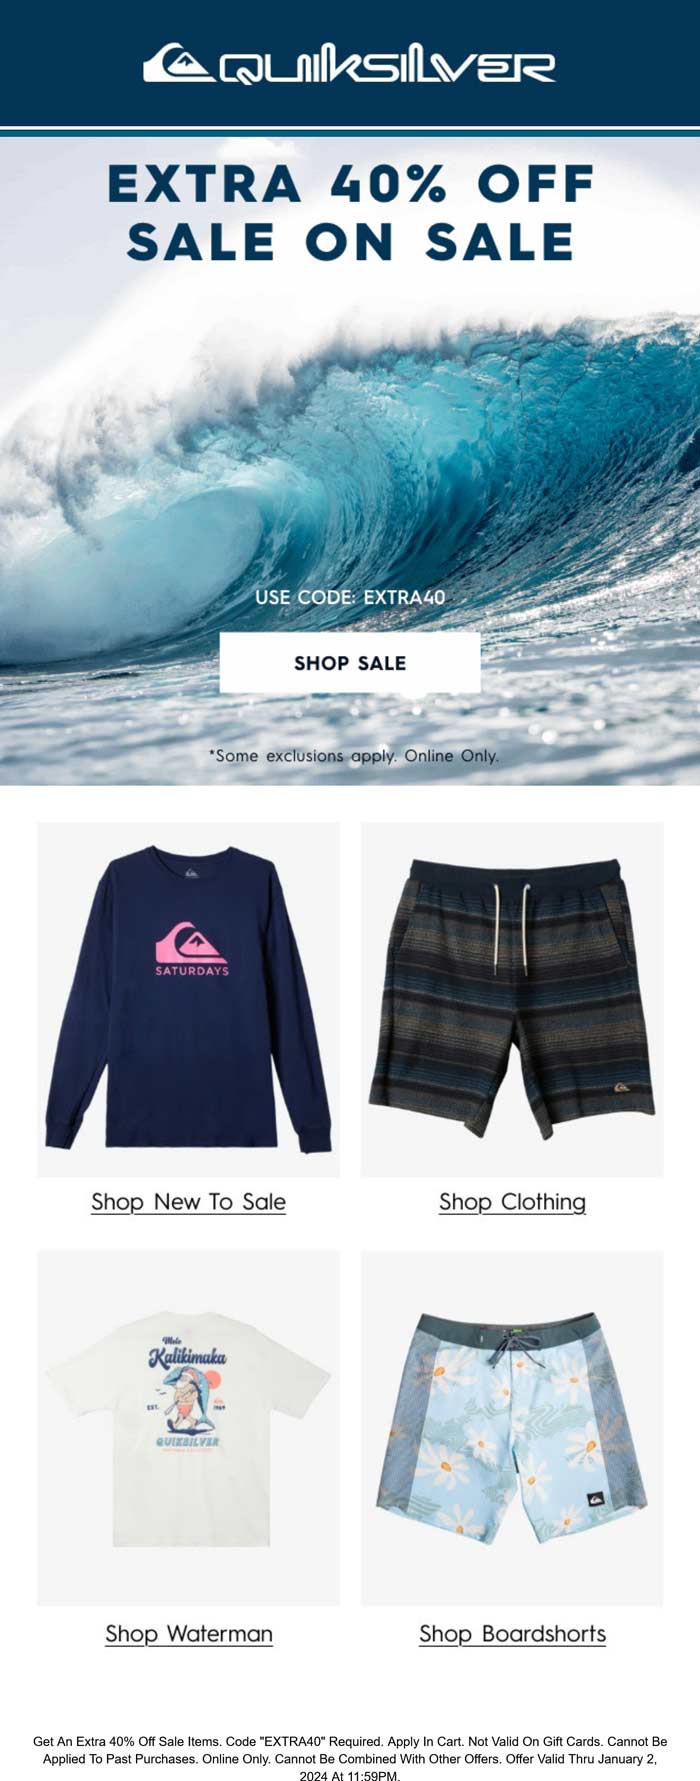 Extra 40% off sale items at Quiksilver via promo code EXTRA40 #quiksilver